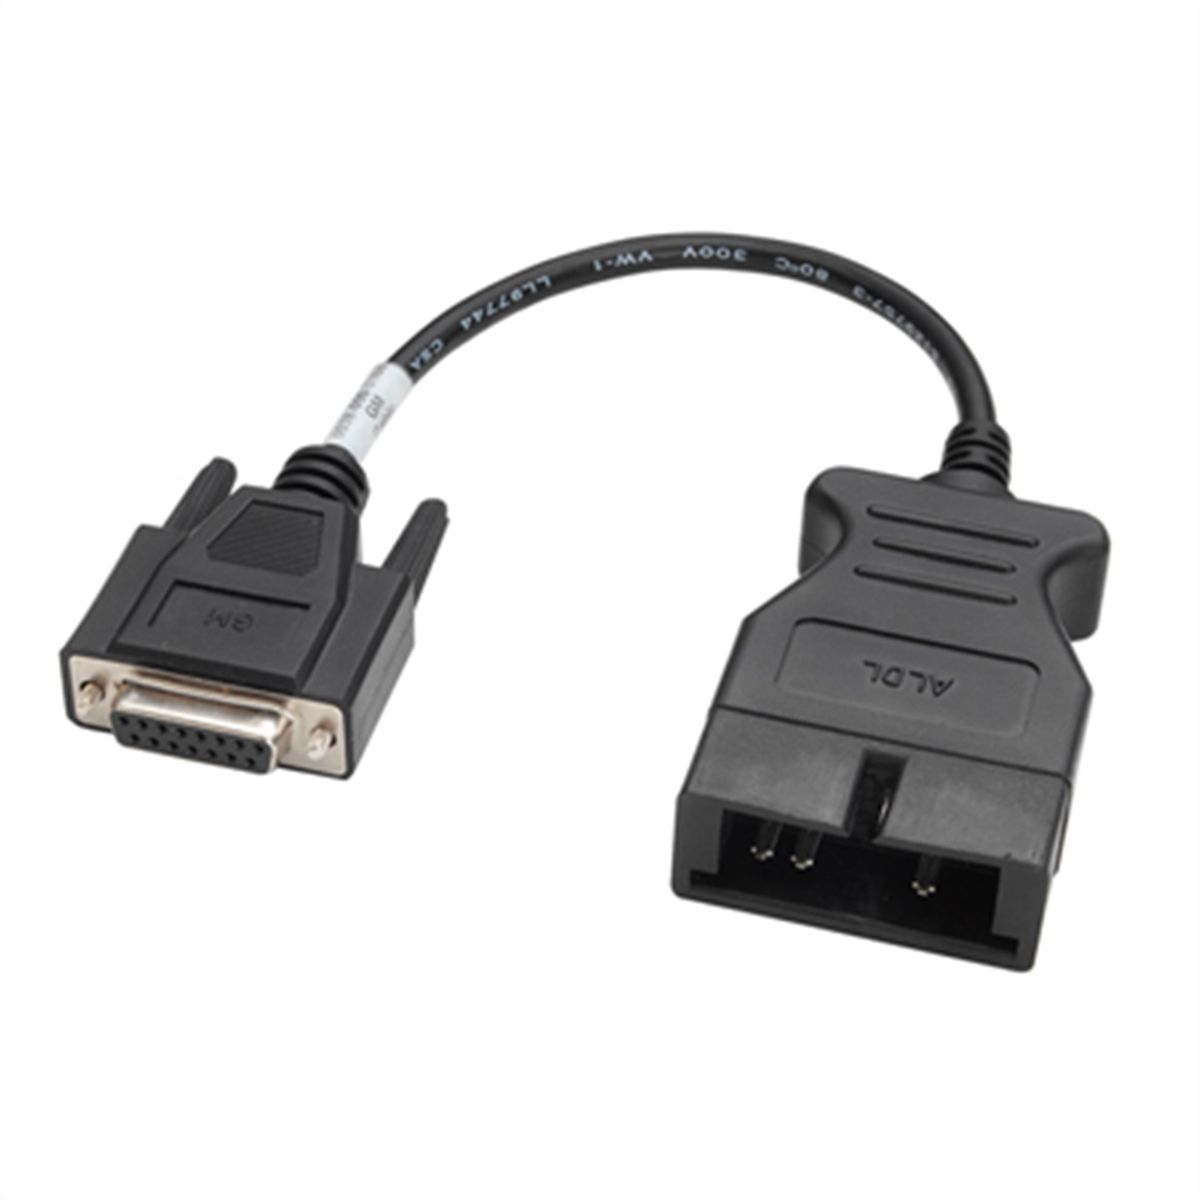 OBD2 OBDII Data Cable for Actron Super AutoScanner CP9145 & CP9150 Code Reader 